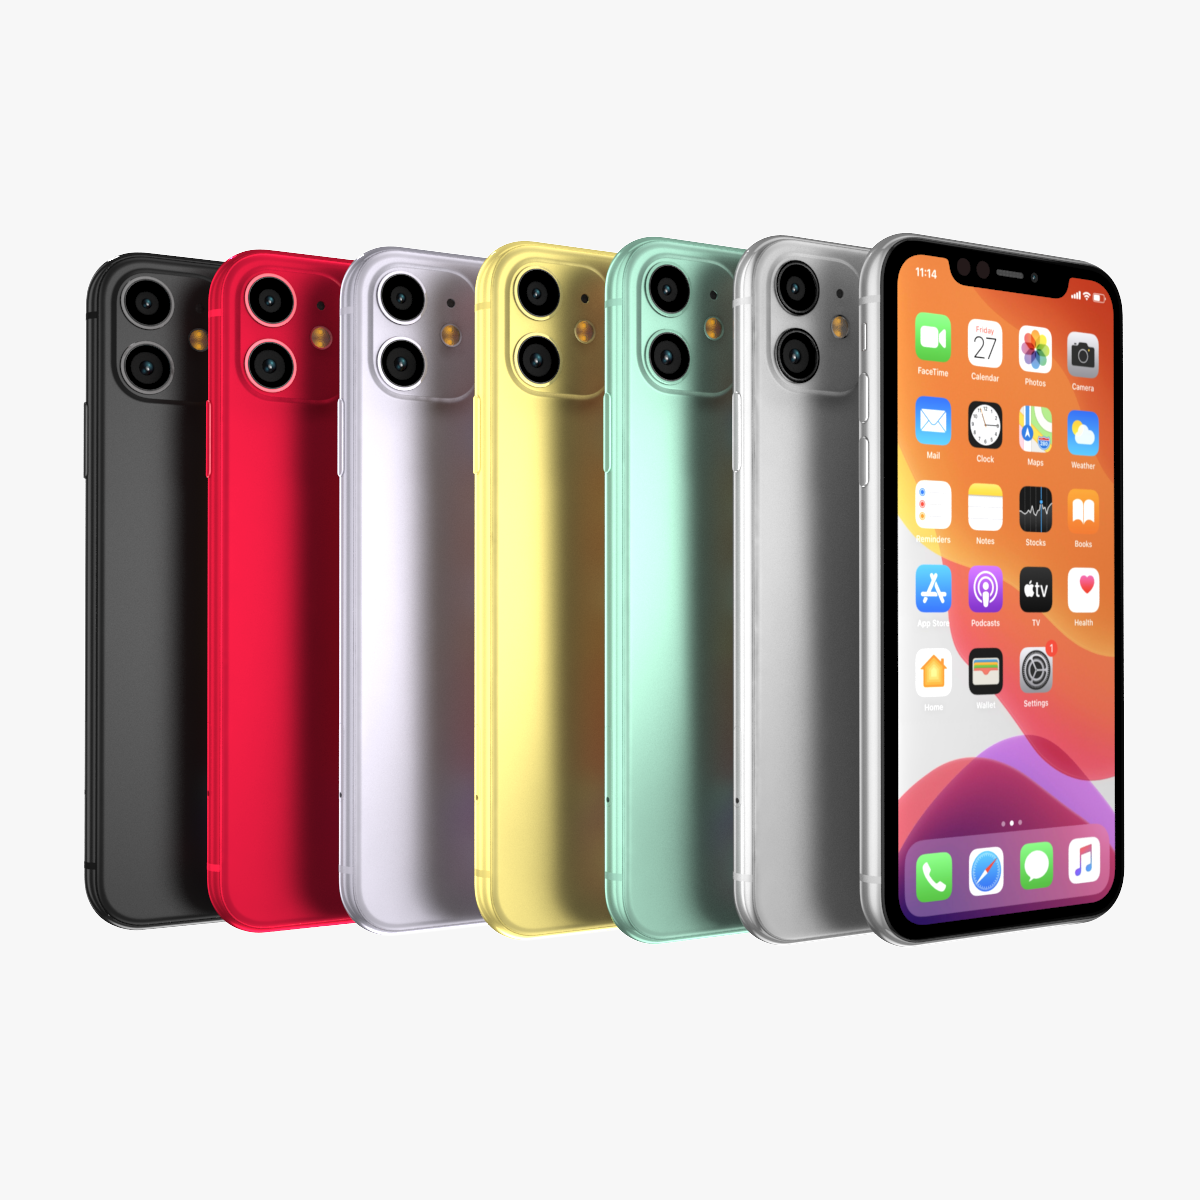 Apple Iphone 11 Full Color 3d Model In Phone And Cell Phone